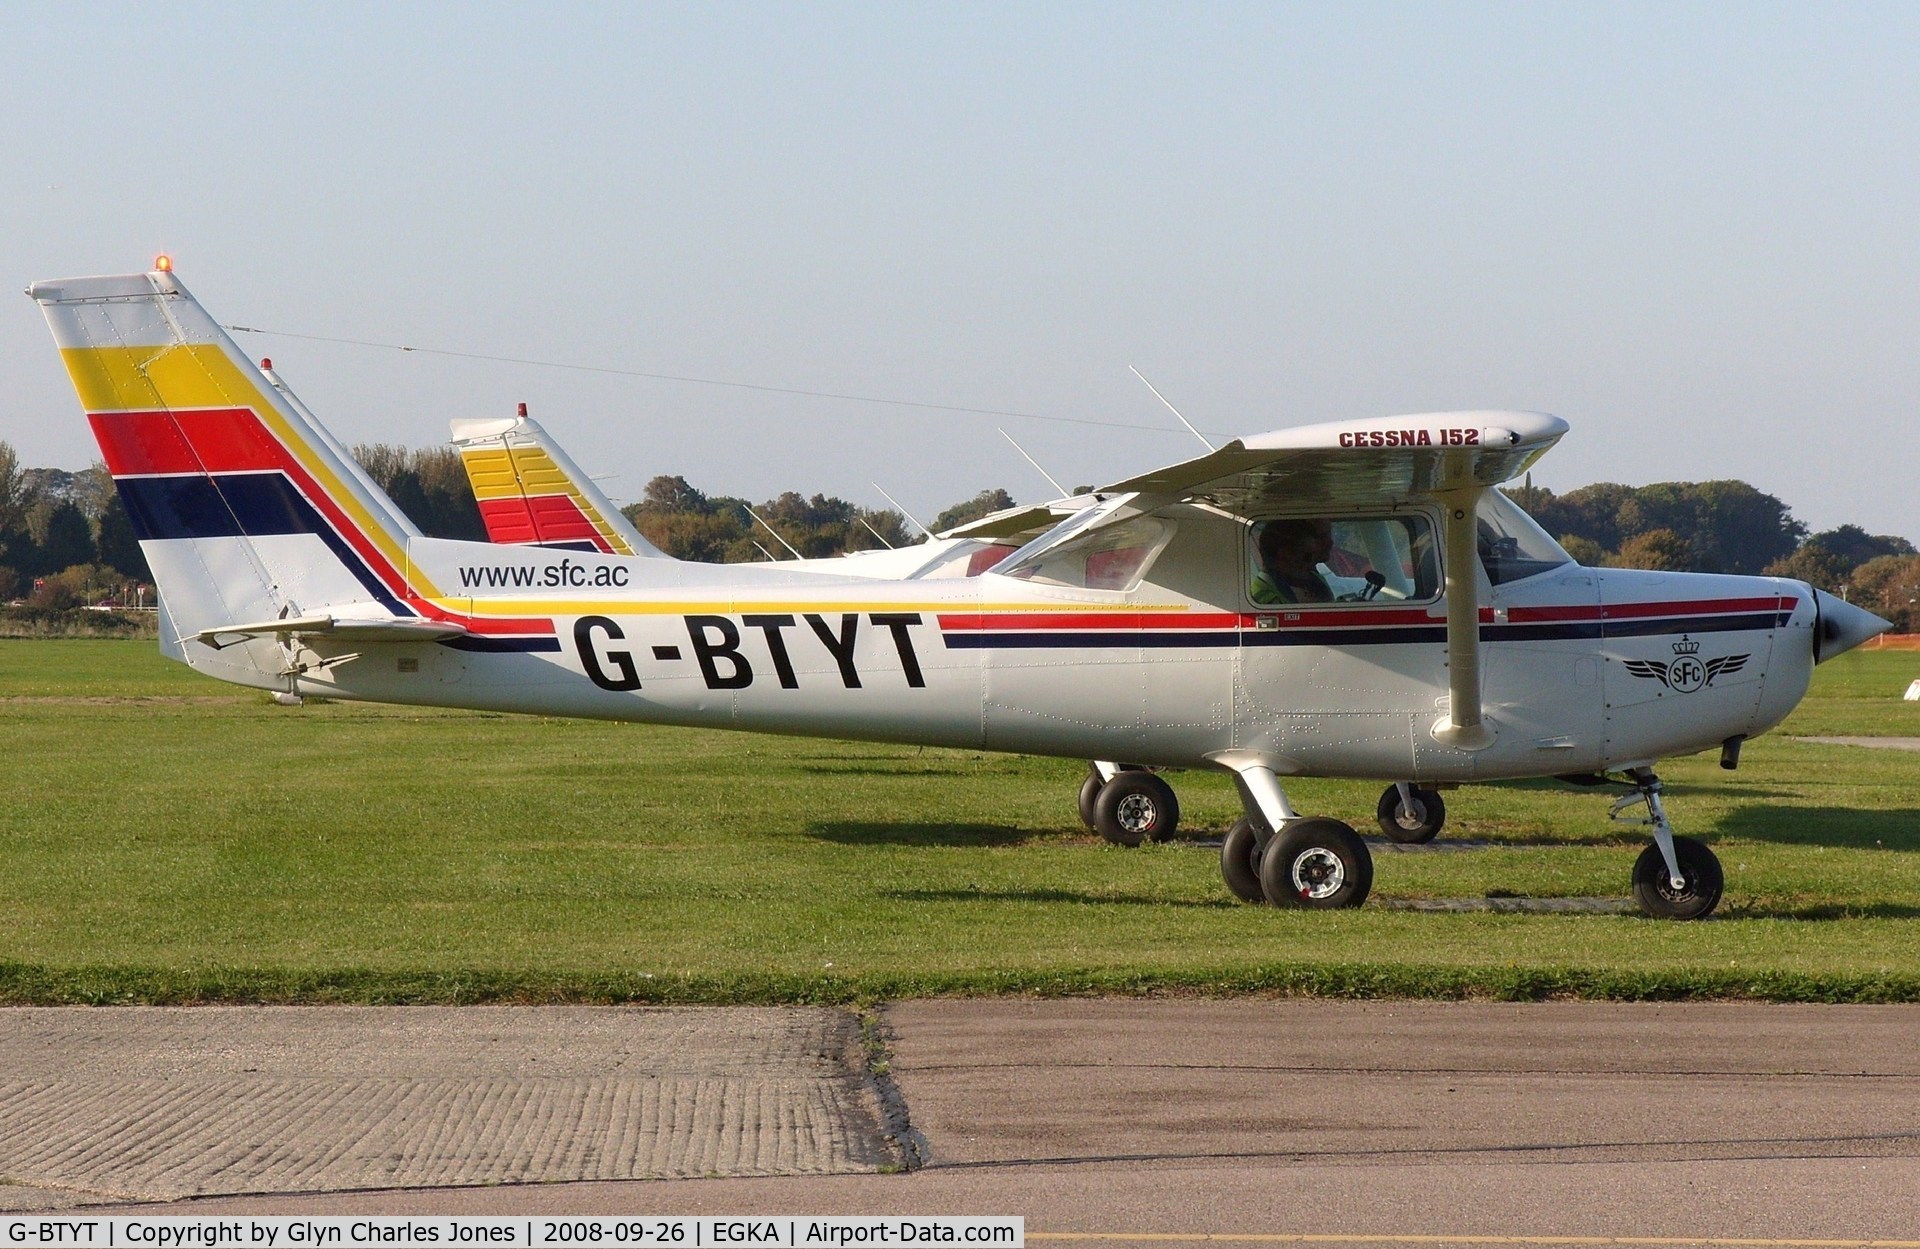 G-BTYT, 1978 Cessna 152 C/N 152-80455, Just started up after going through the preliminaries for another training flight. Previously N24931. Owned by Cristal Air Ltd. Operated by Sussex Flying Club Ltd.